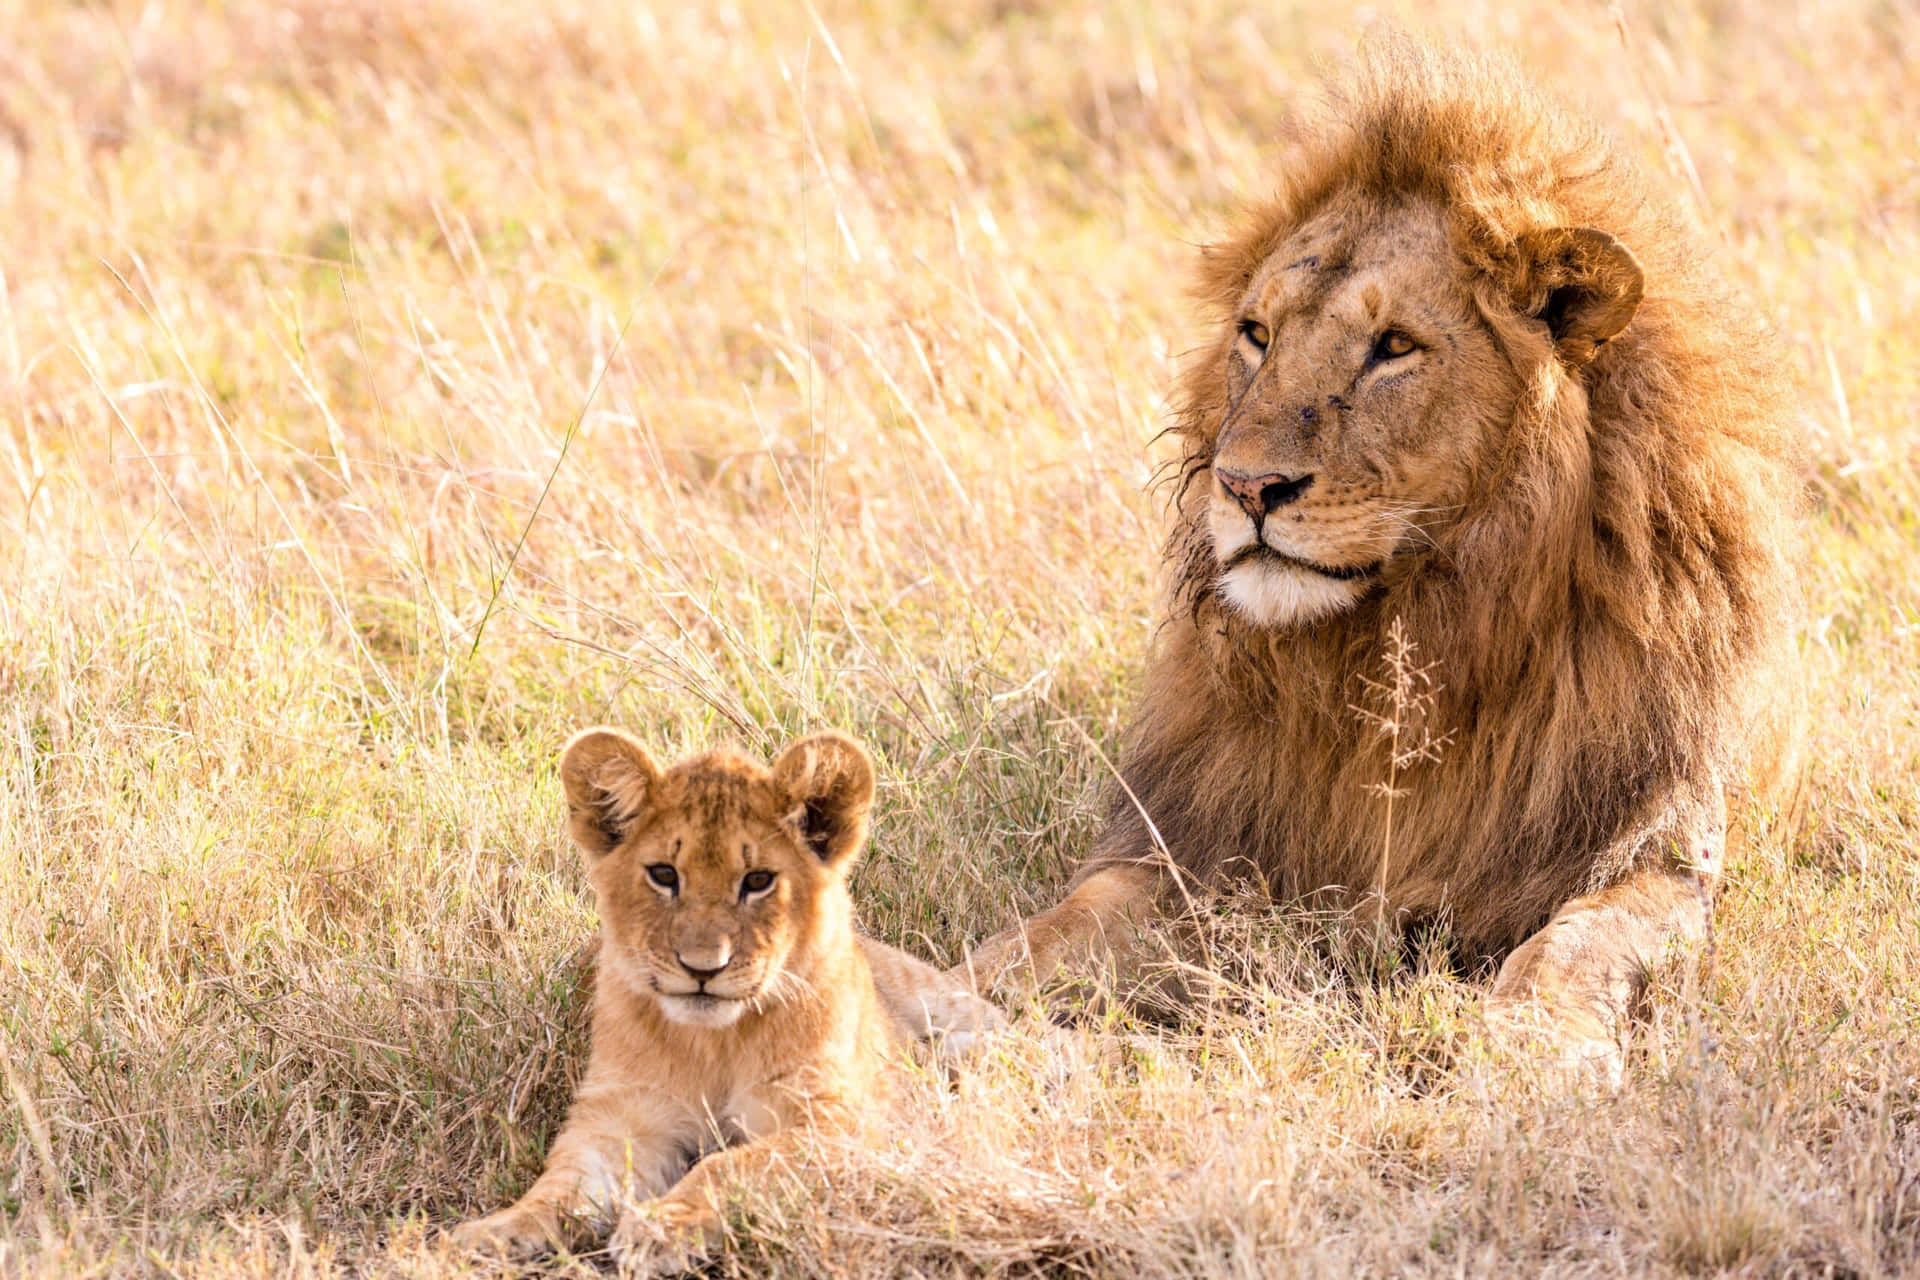 A Lion And A Cub Are Sitting In The Grass